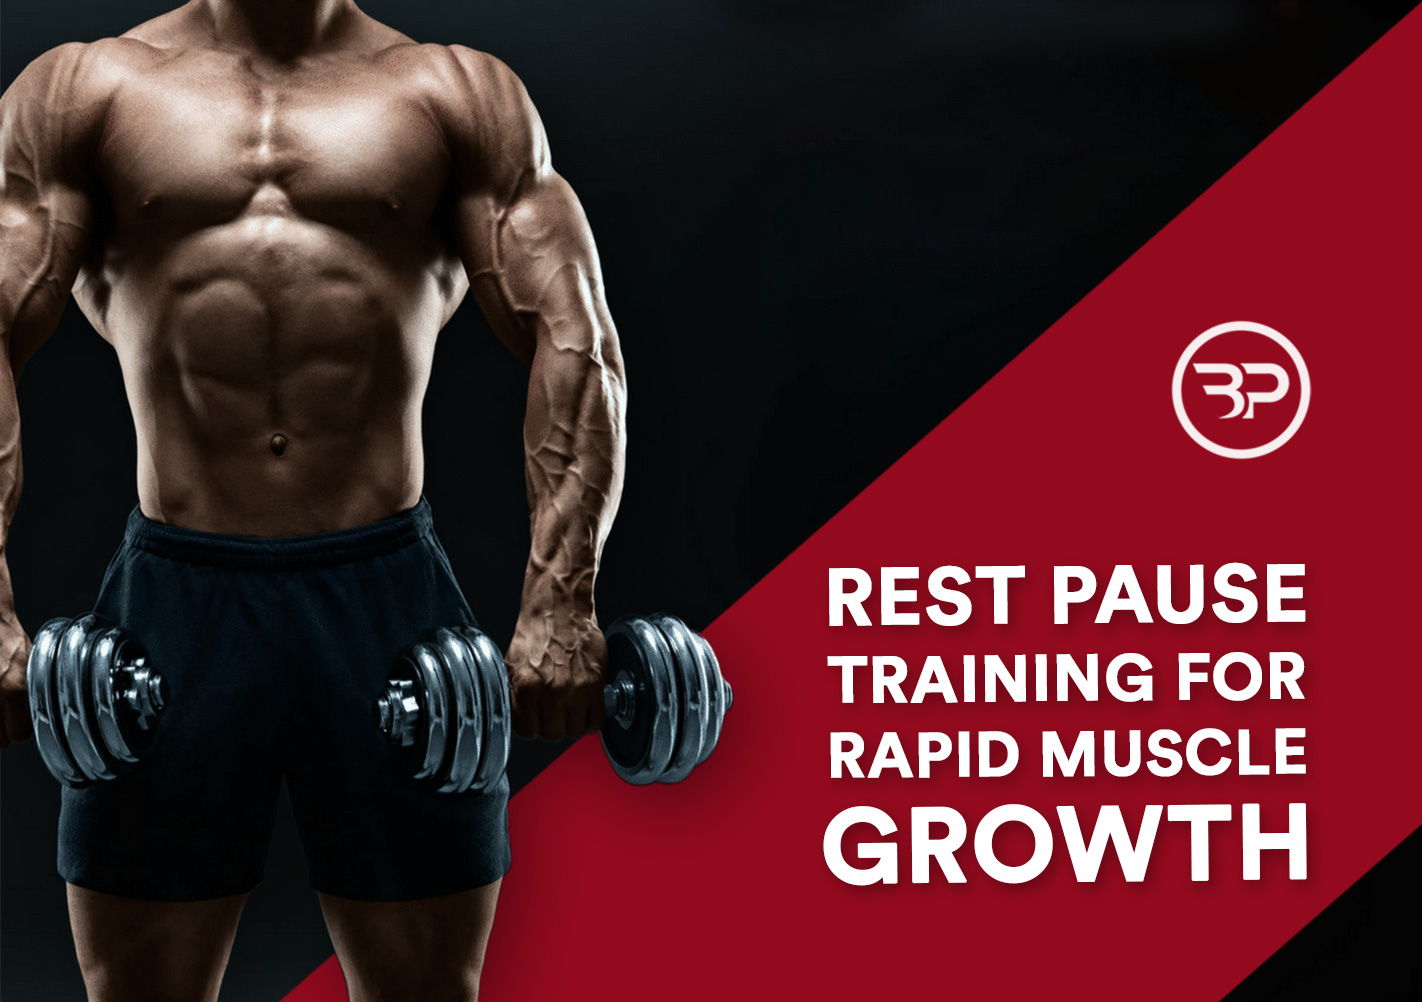 https://bachperformance.com/wp-content/uploads/2018/07/Rest-Pause-Training-For-Rapid-Muscle-Growth.jpg